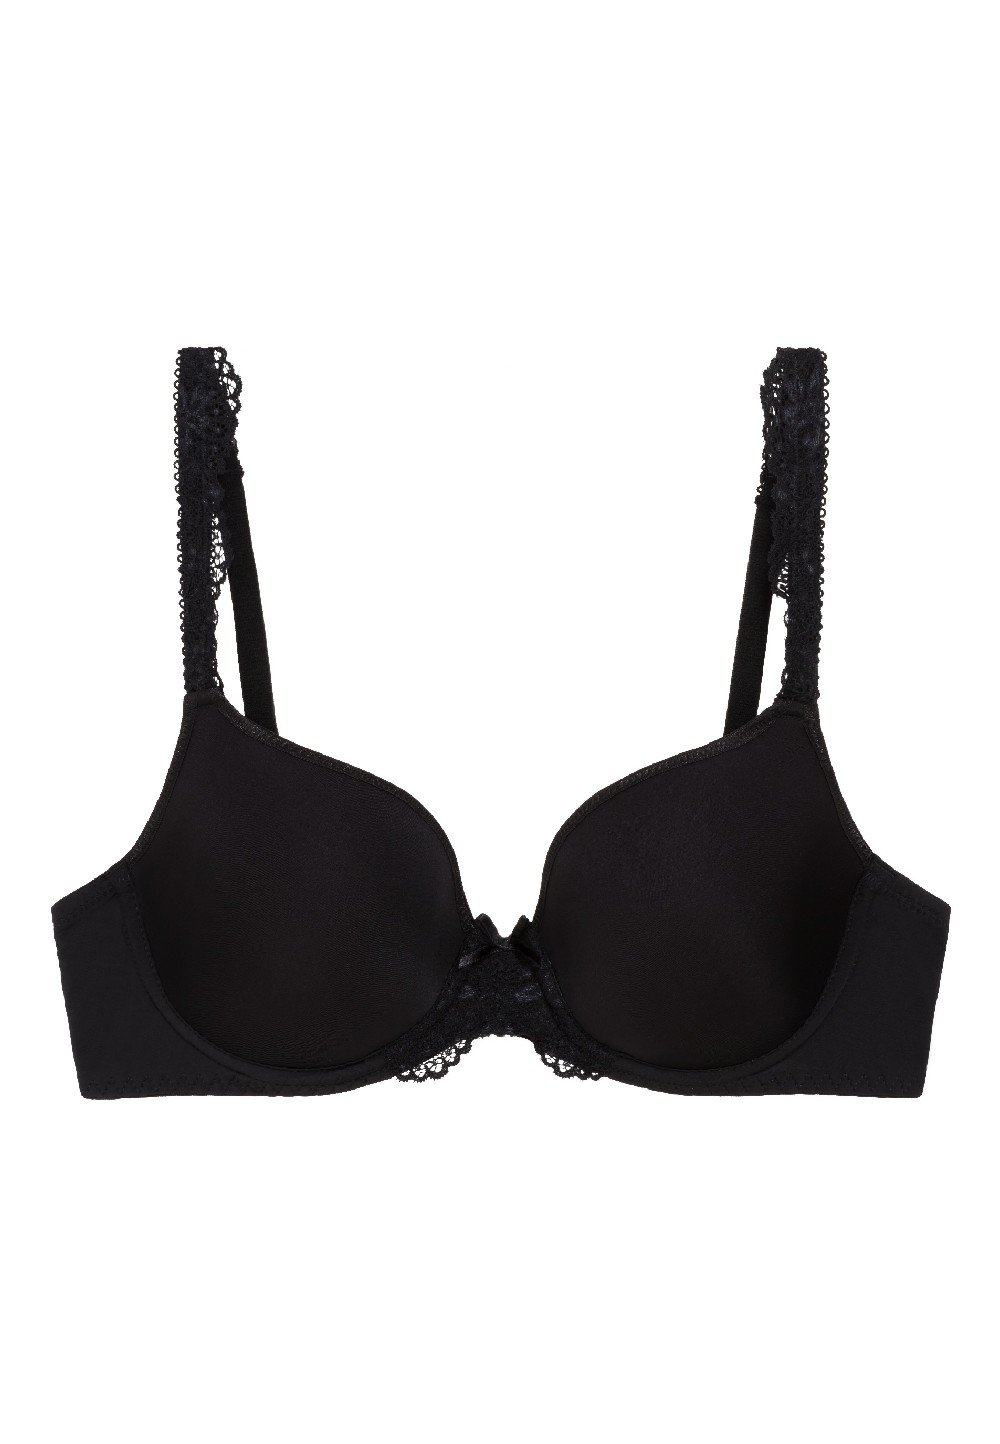 LingaDore Daily Lace T-shirt - Underwire Bra  Available at Illusions Lingerie